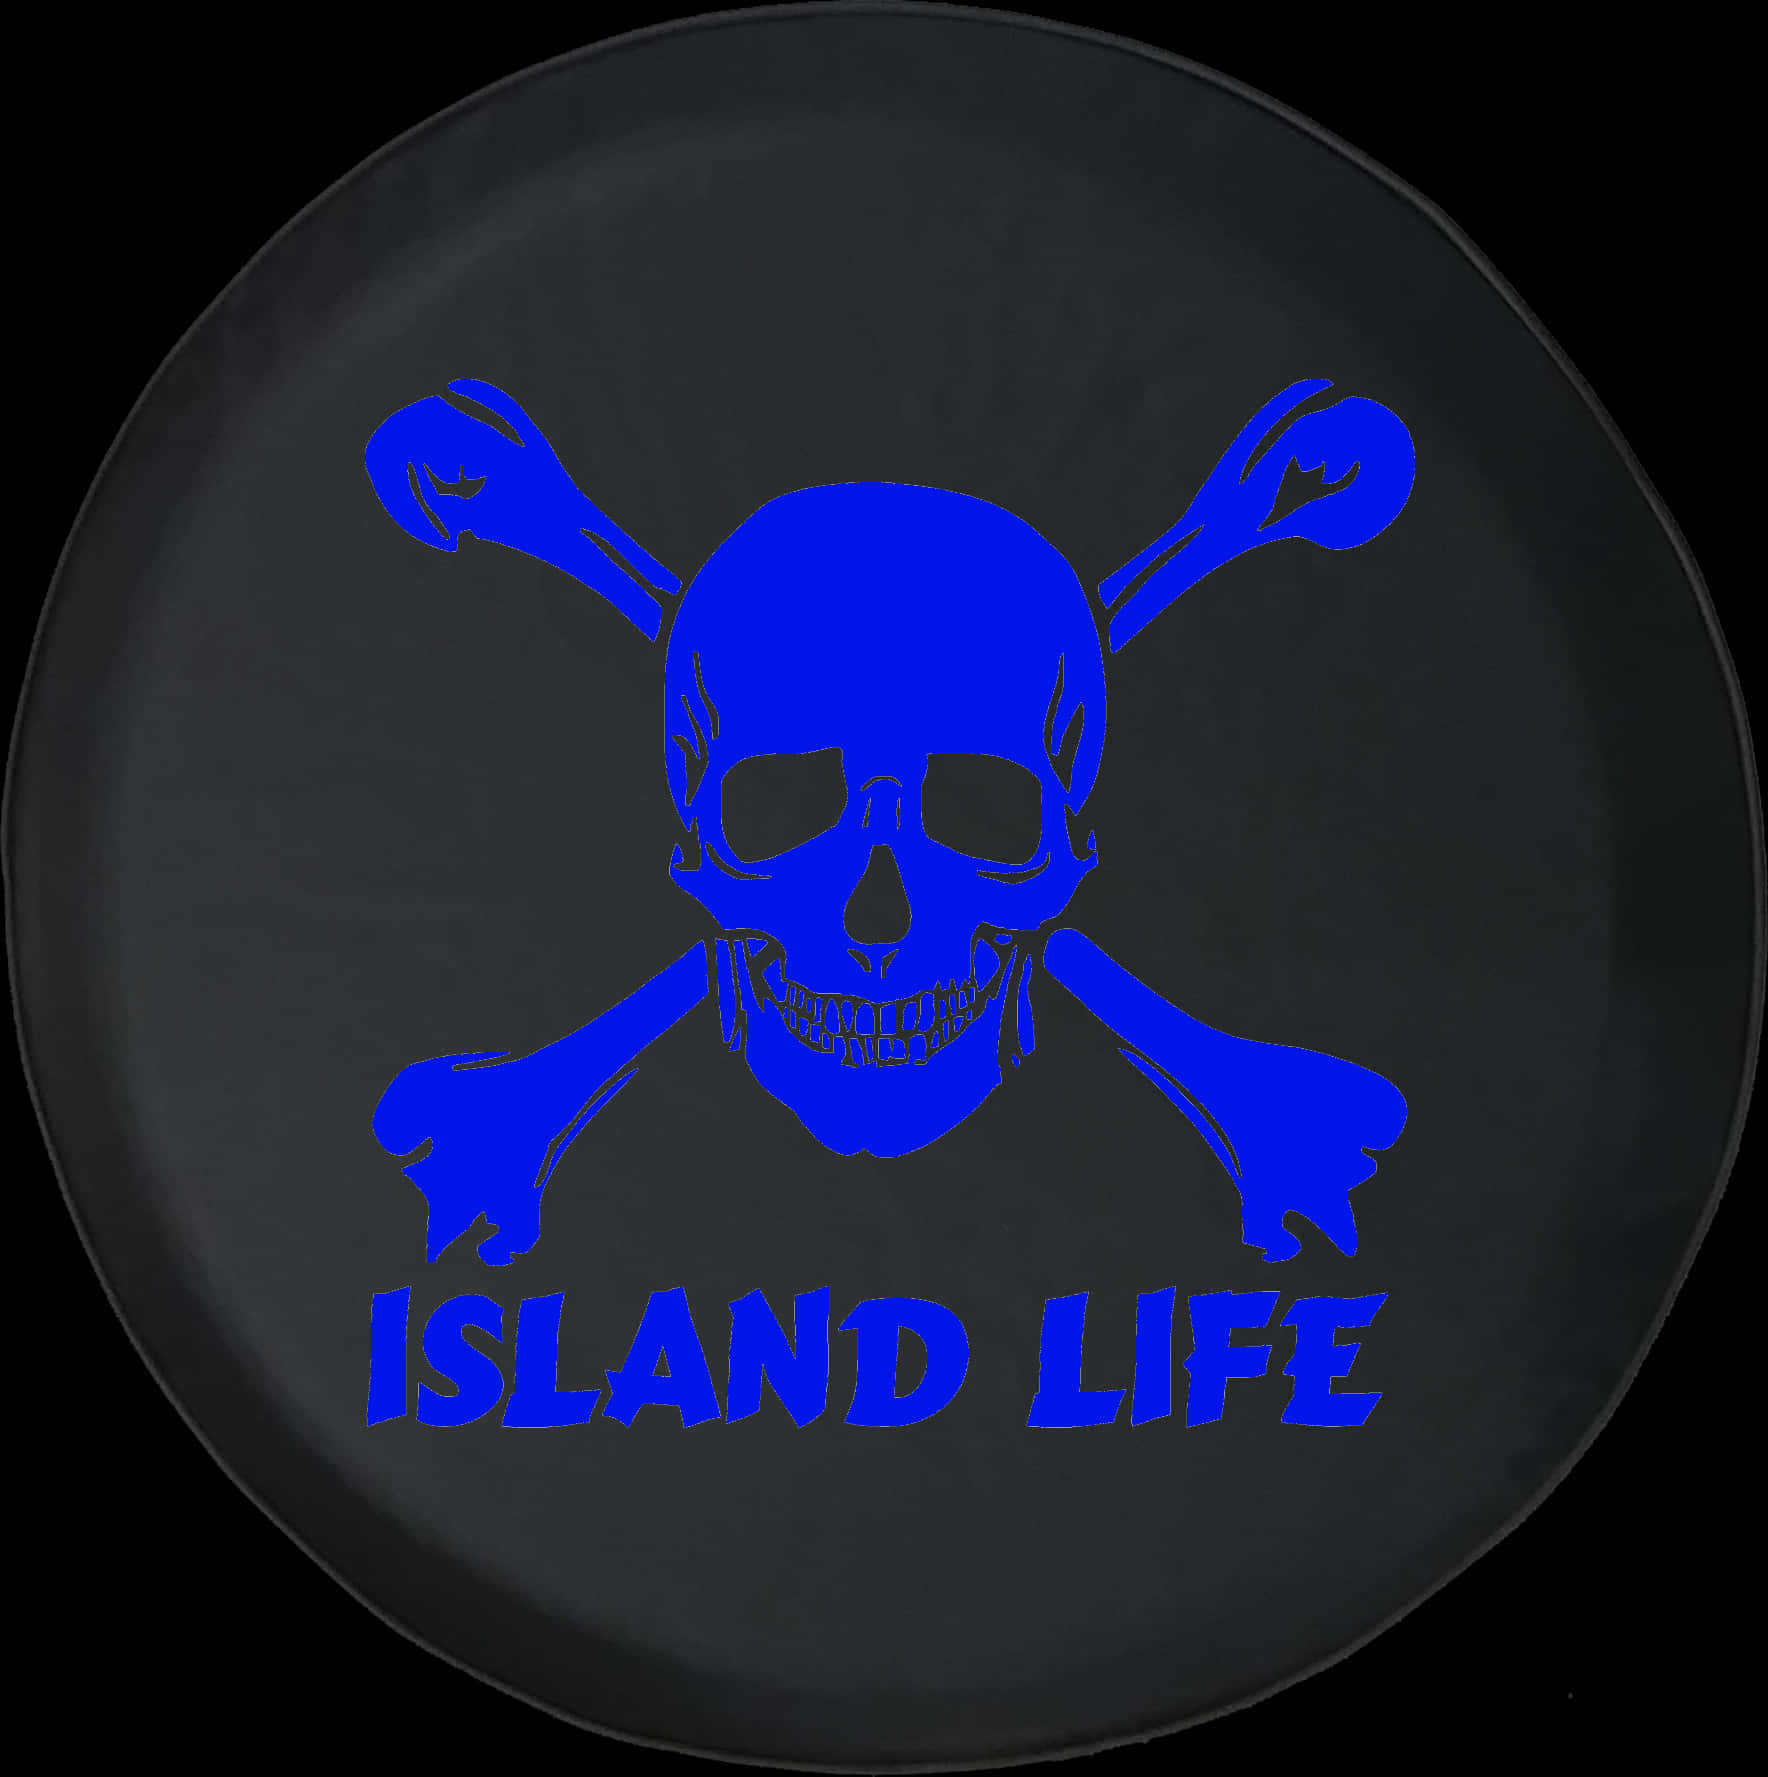 A Blue Skull And Crossbones On A Black Surface